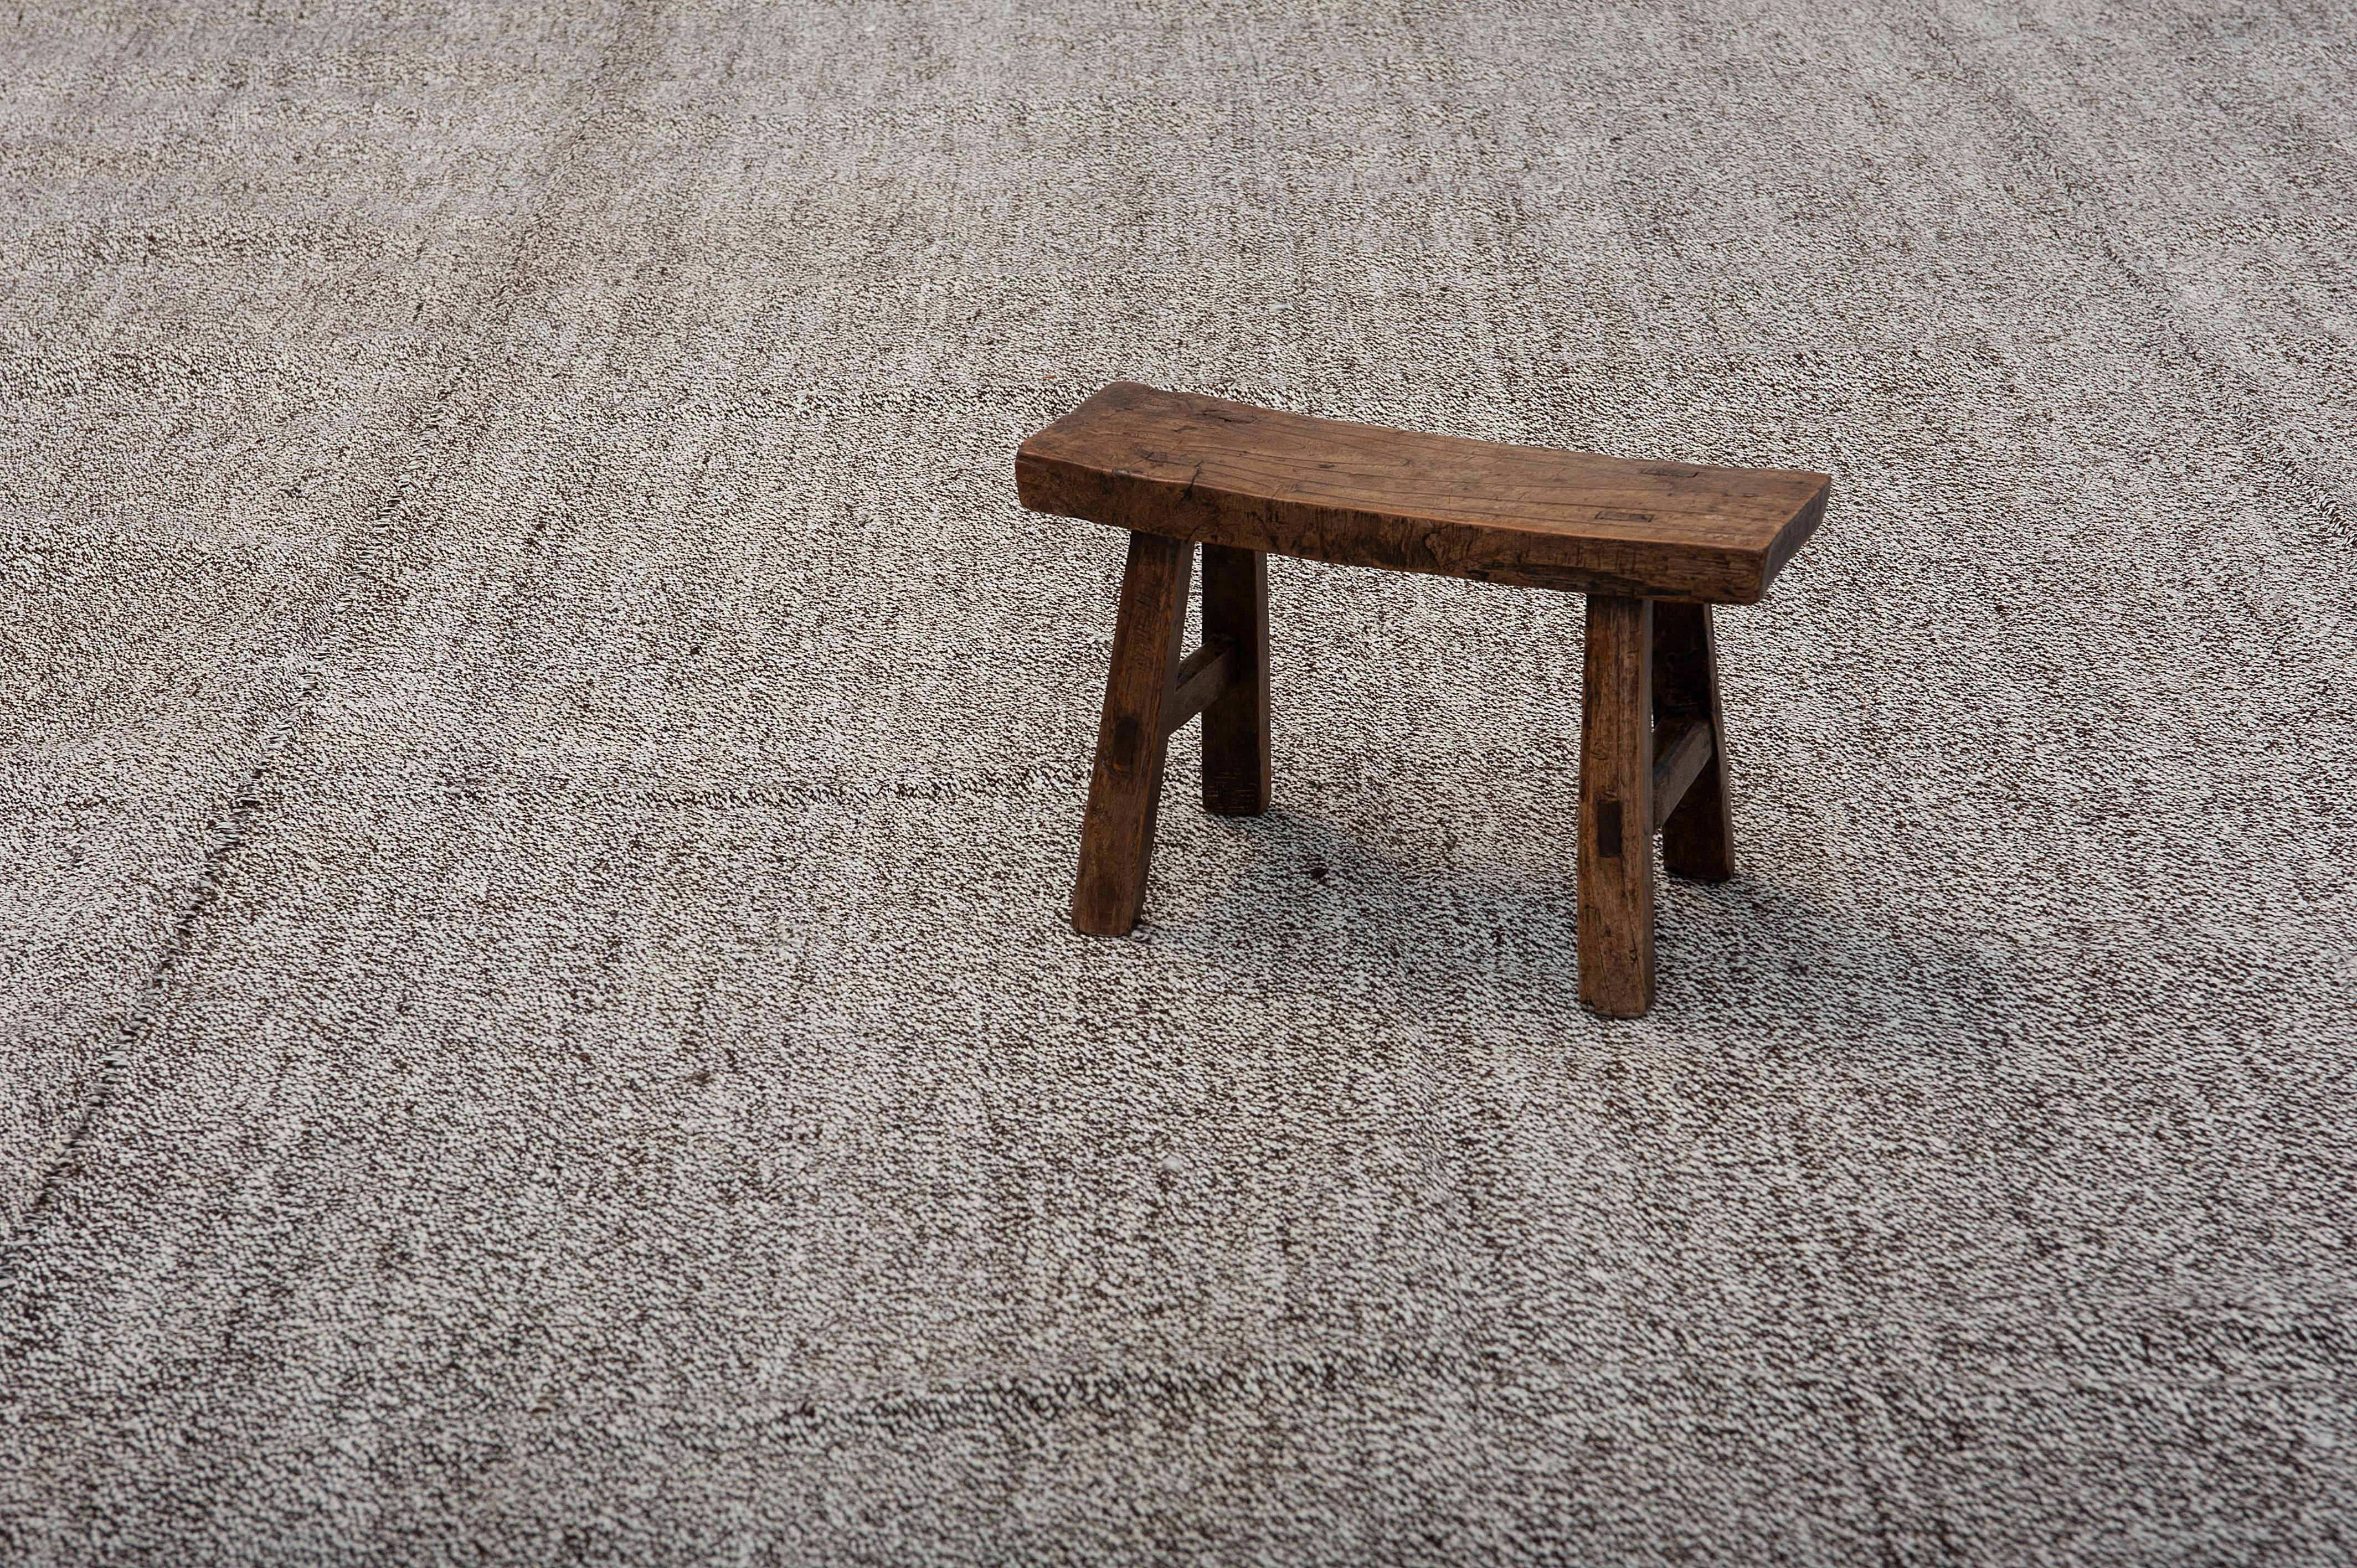 These large vintage Kilim in a shade of grayish-earthy tone is an excellent canvas for different design aesthetics. From Minimalist, Scandinavian, rustic, boho chic, any imaginable style would be complemented beautifully by these flat-weave. Well